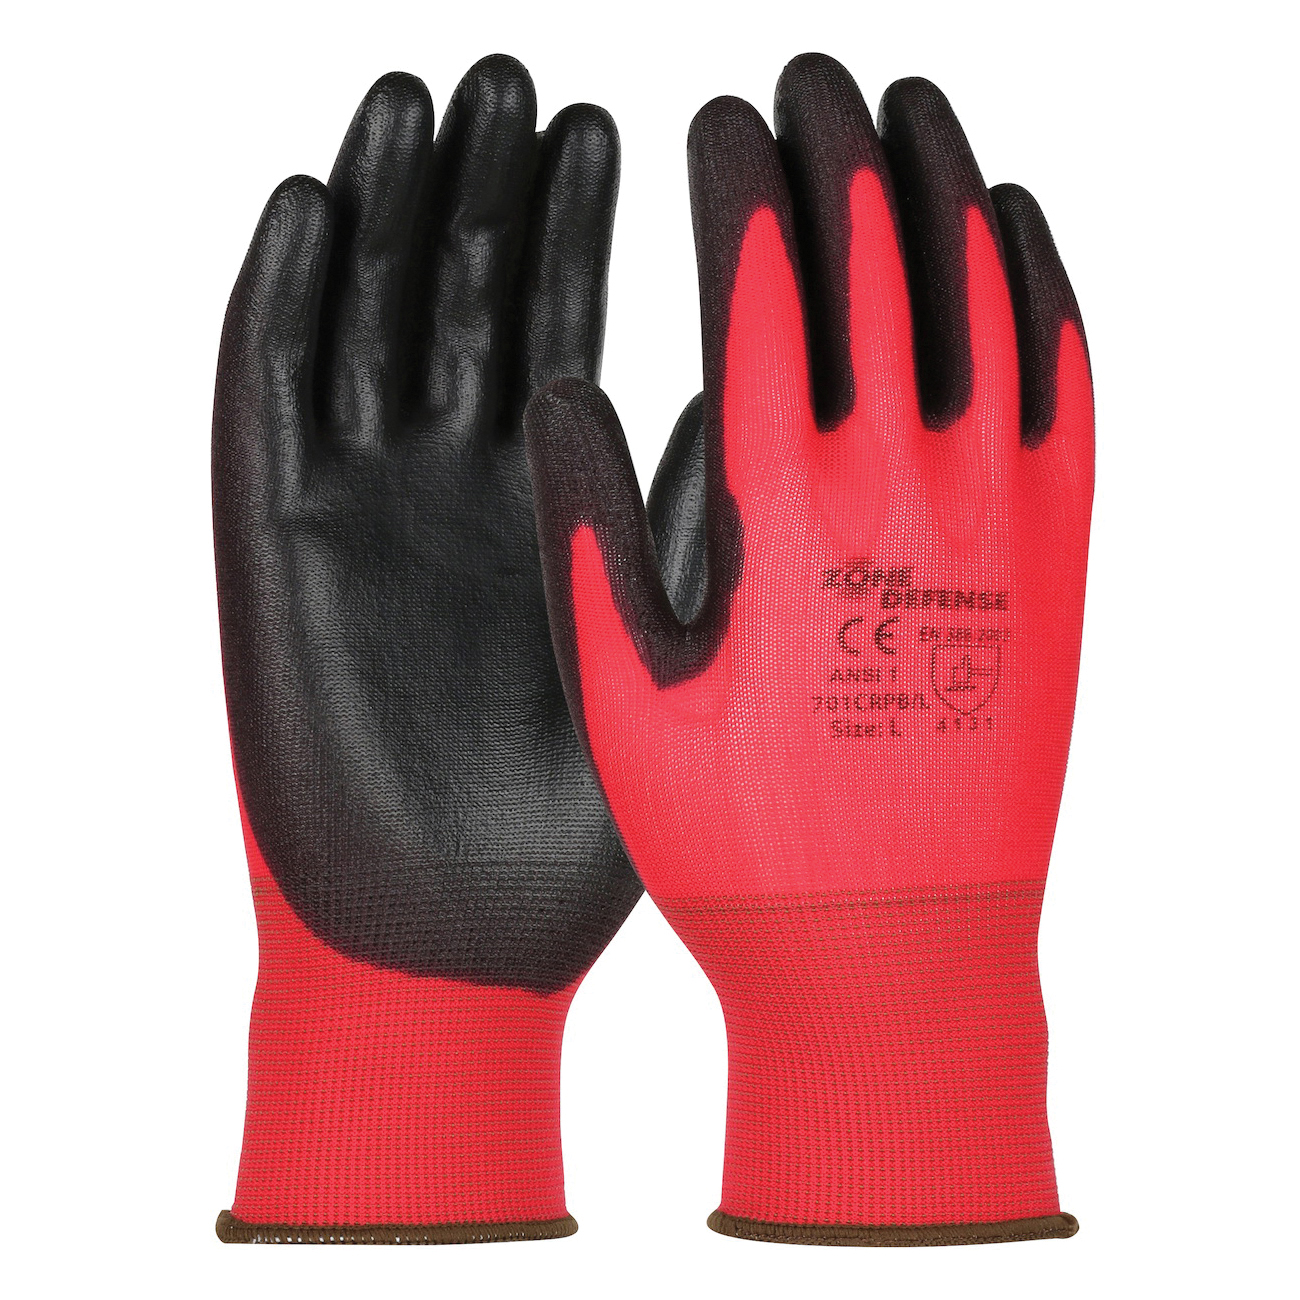 PIP® 701CRPB/XL Unisex General Purpose Gloves, Coated/Work, Seamless Style, XL, Polyurethane Palm, Nylon, Black/Red, Ribbed Knit Wrist Cuff, Polyurethane Coating, Resists: Cut and Puncture